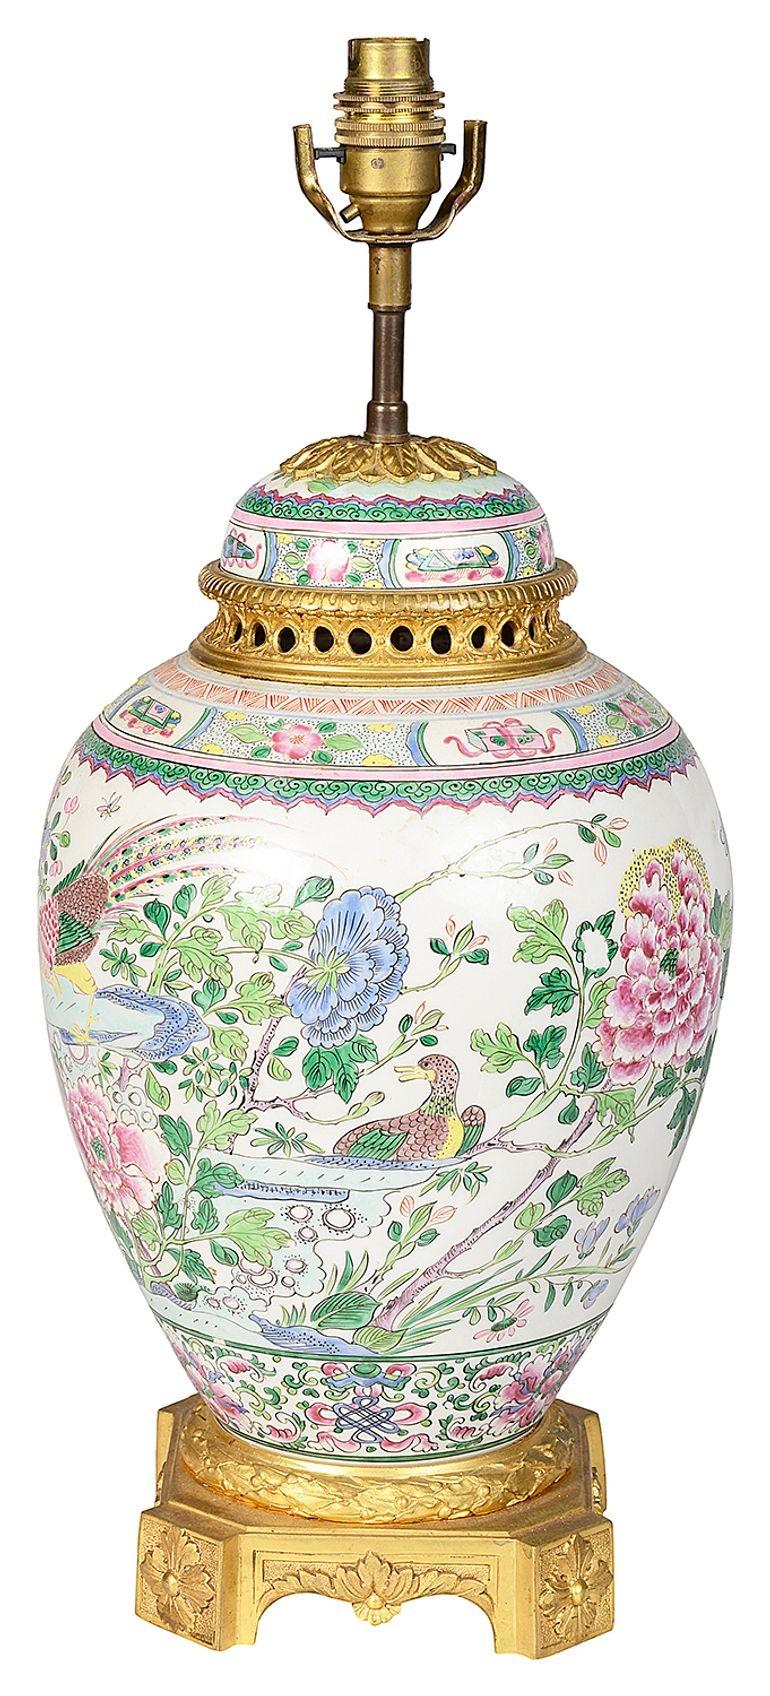 A very good quality 19th Century Chinese Famille Rose lidded jar, having wonderful exotic flowers and birds all hand painted, mounted with gilded ormolu lid, collar and base.
 
Batch 73 G9919/23. SKZN